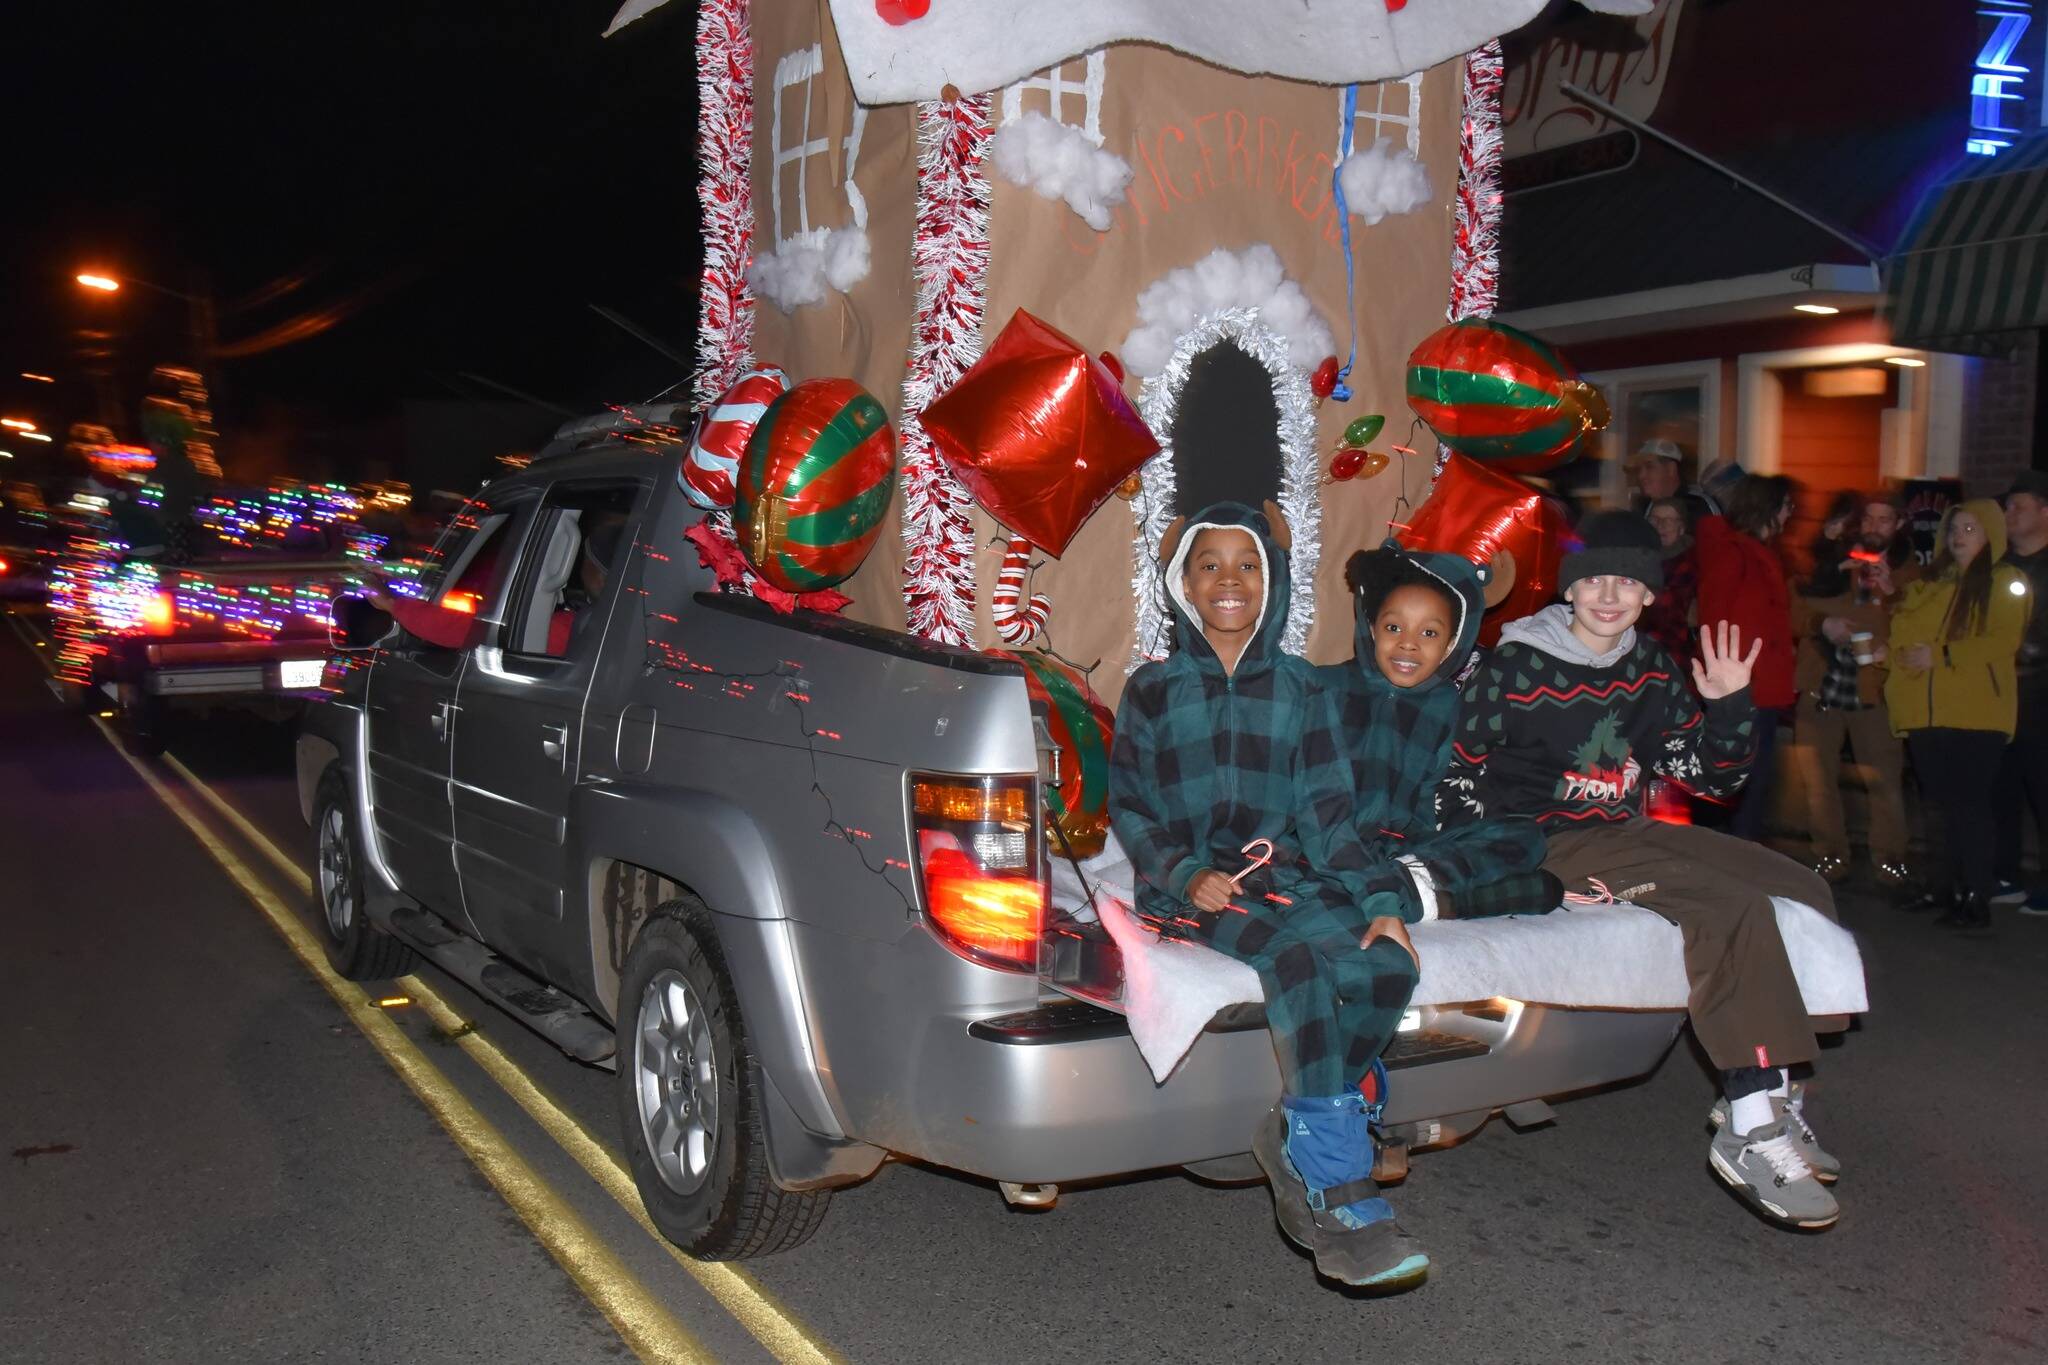 Jim Diers photo
Kids smile for the camera while riding down Vashon Highway SW during the WinterFest parade.